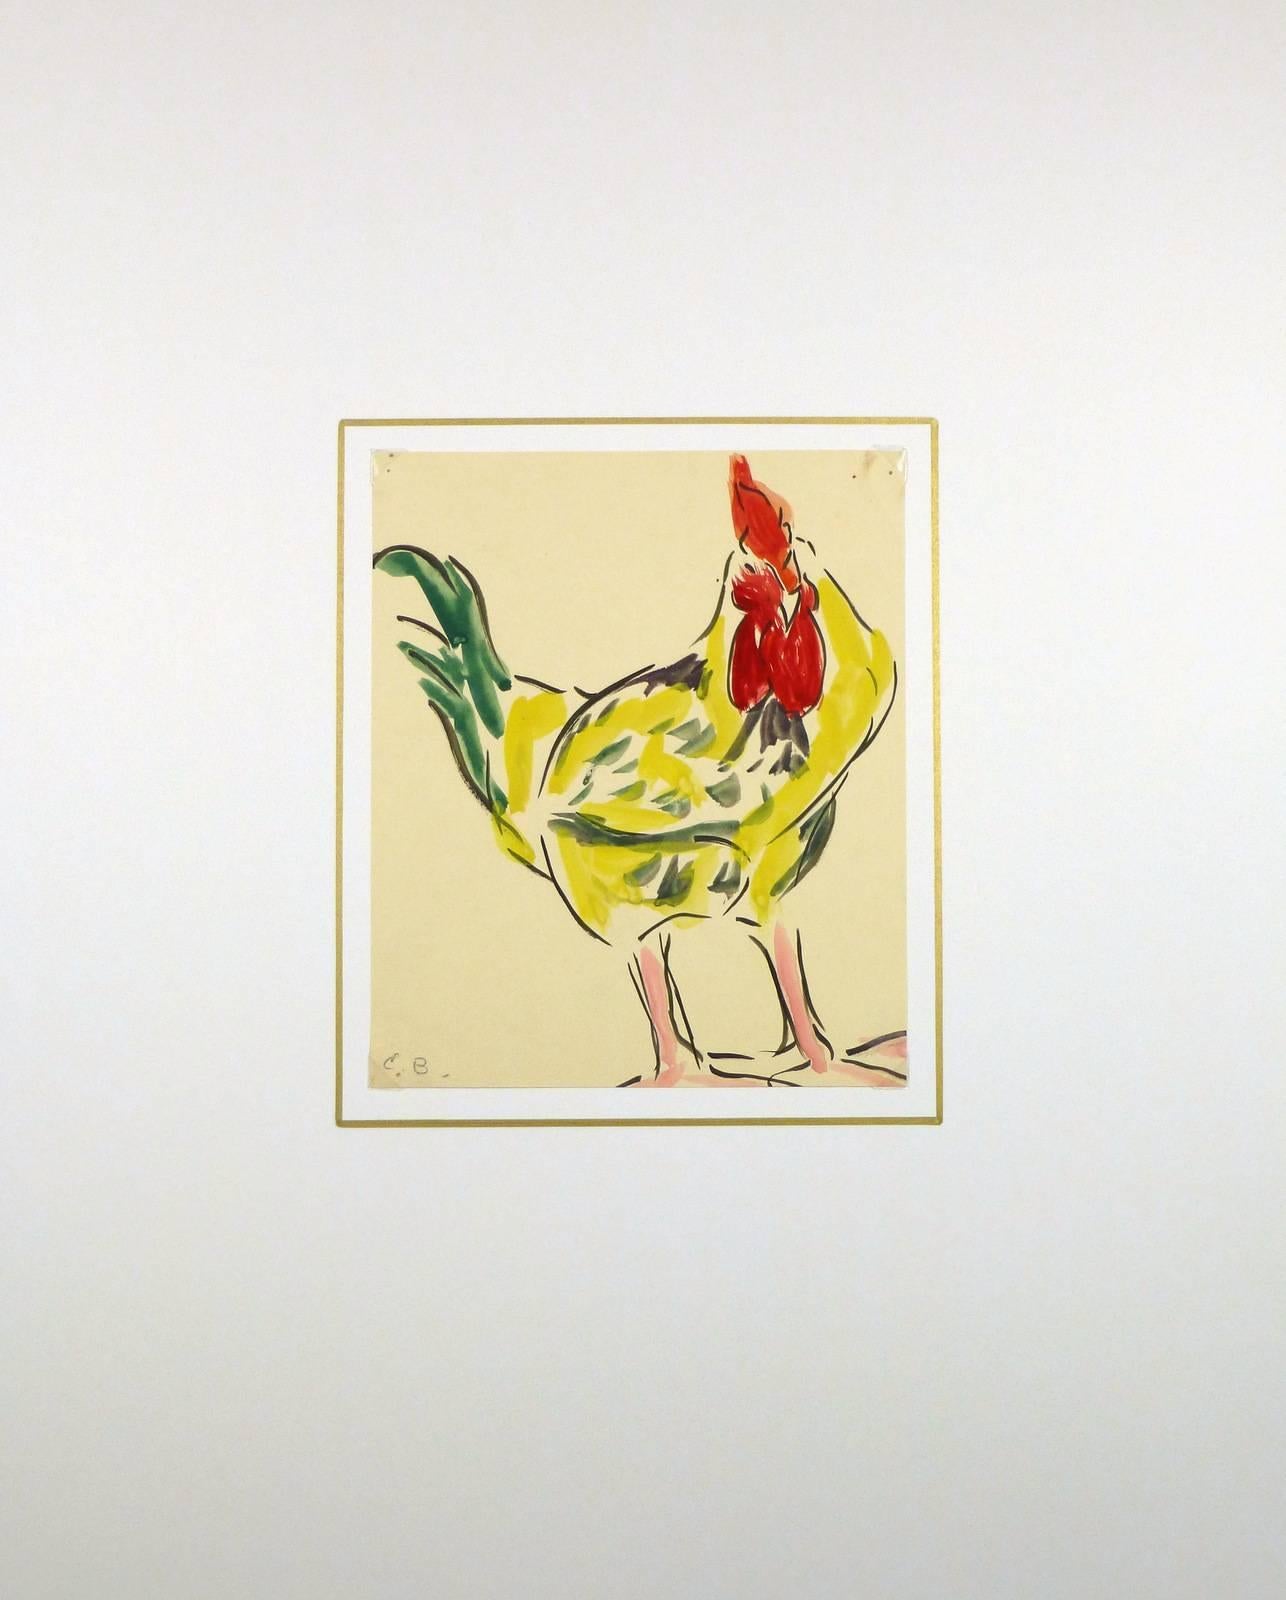 Vivid rooster gouache painting on paper by French artist, initials C.B., circa 1930.  Signed lower left.  

Original artwork on paper displayed on a white mat with a gold border. Archival plastic sleeve and Certificate of Authenticity included.